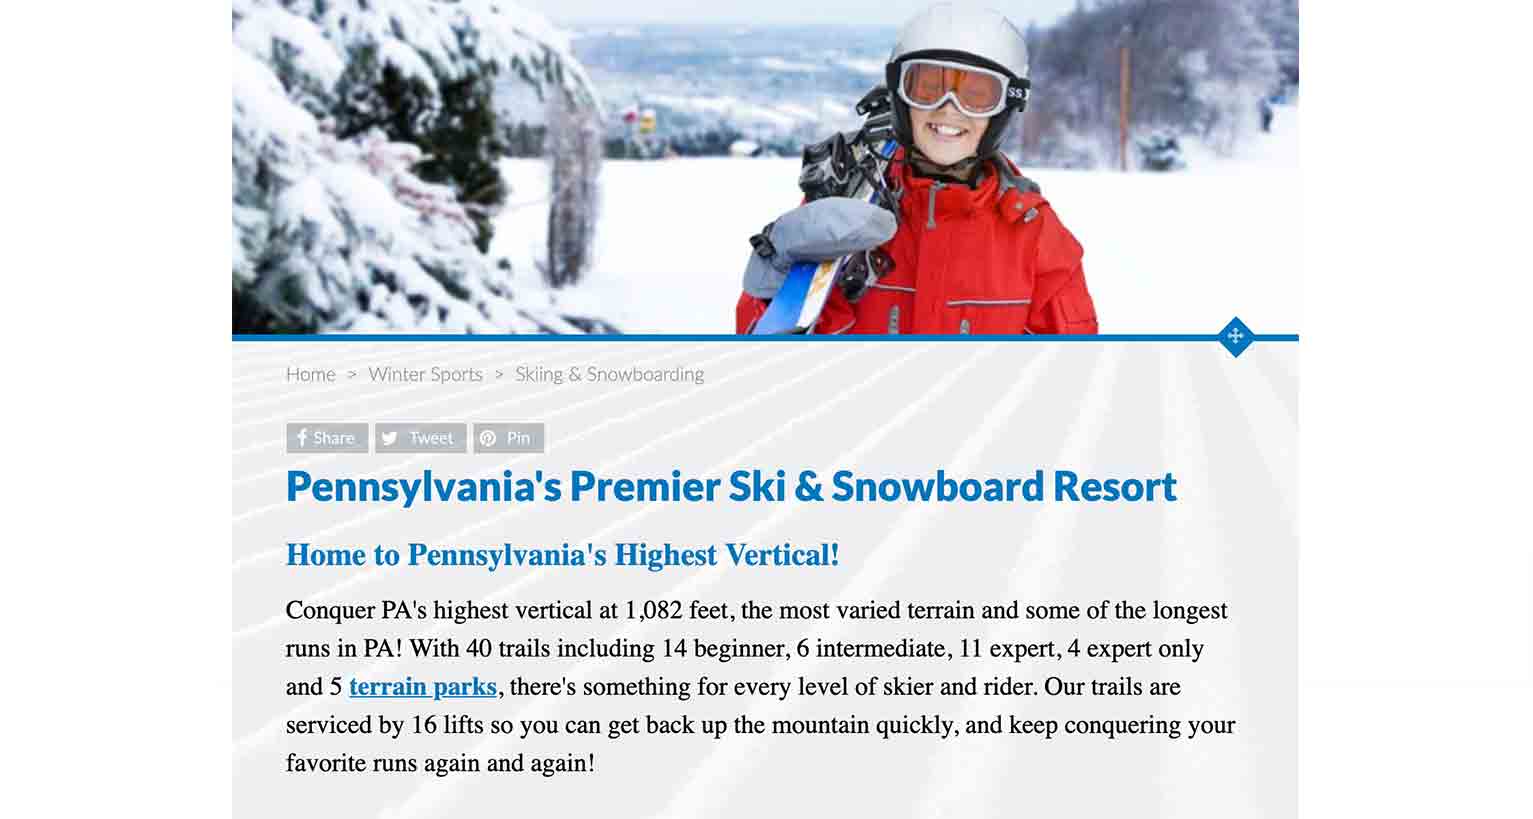 Skier smiles amid snowy backdrop holding skis over 1 shoulder. The copy below the image advertises Blue Mountain as a ski and snowboard resort.